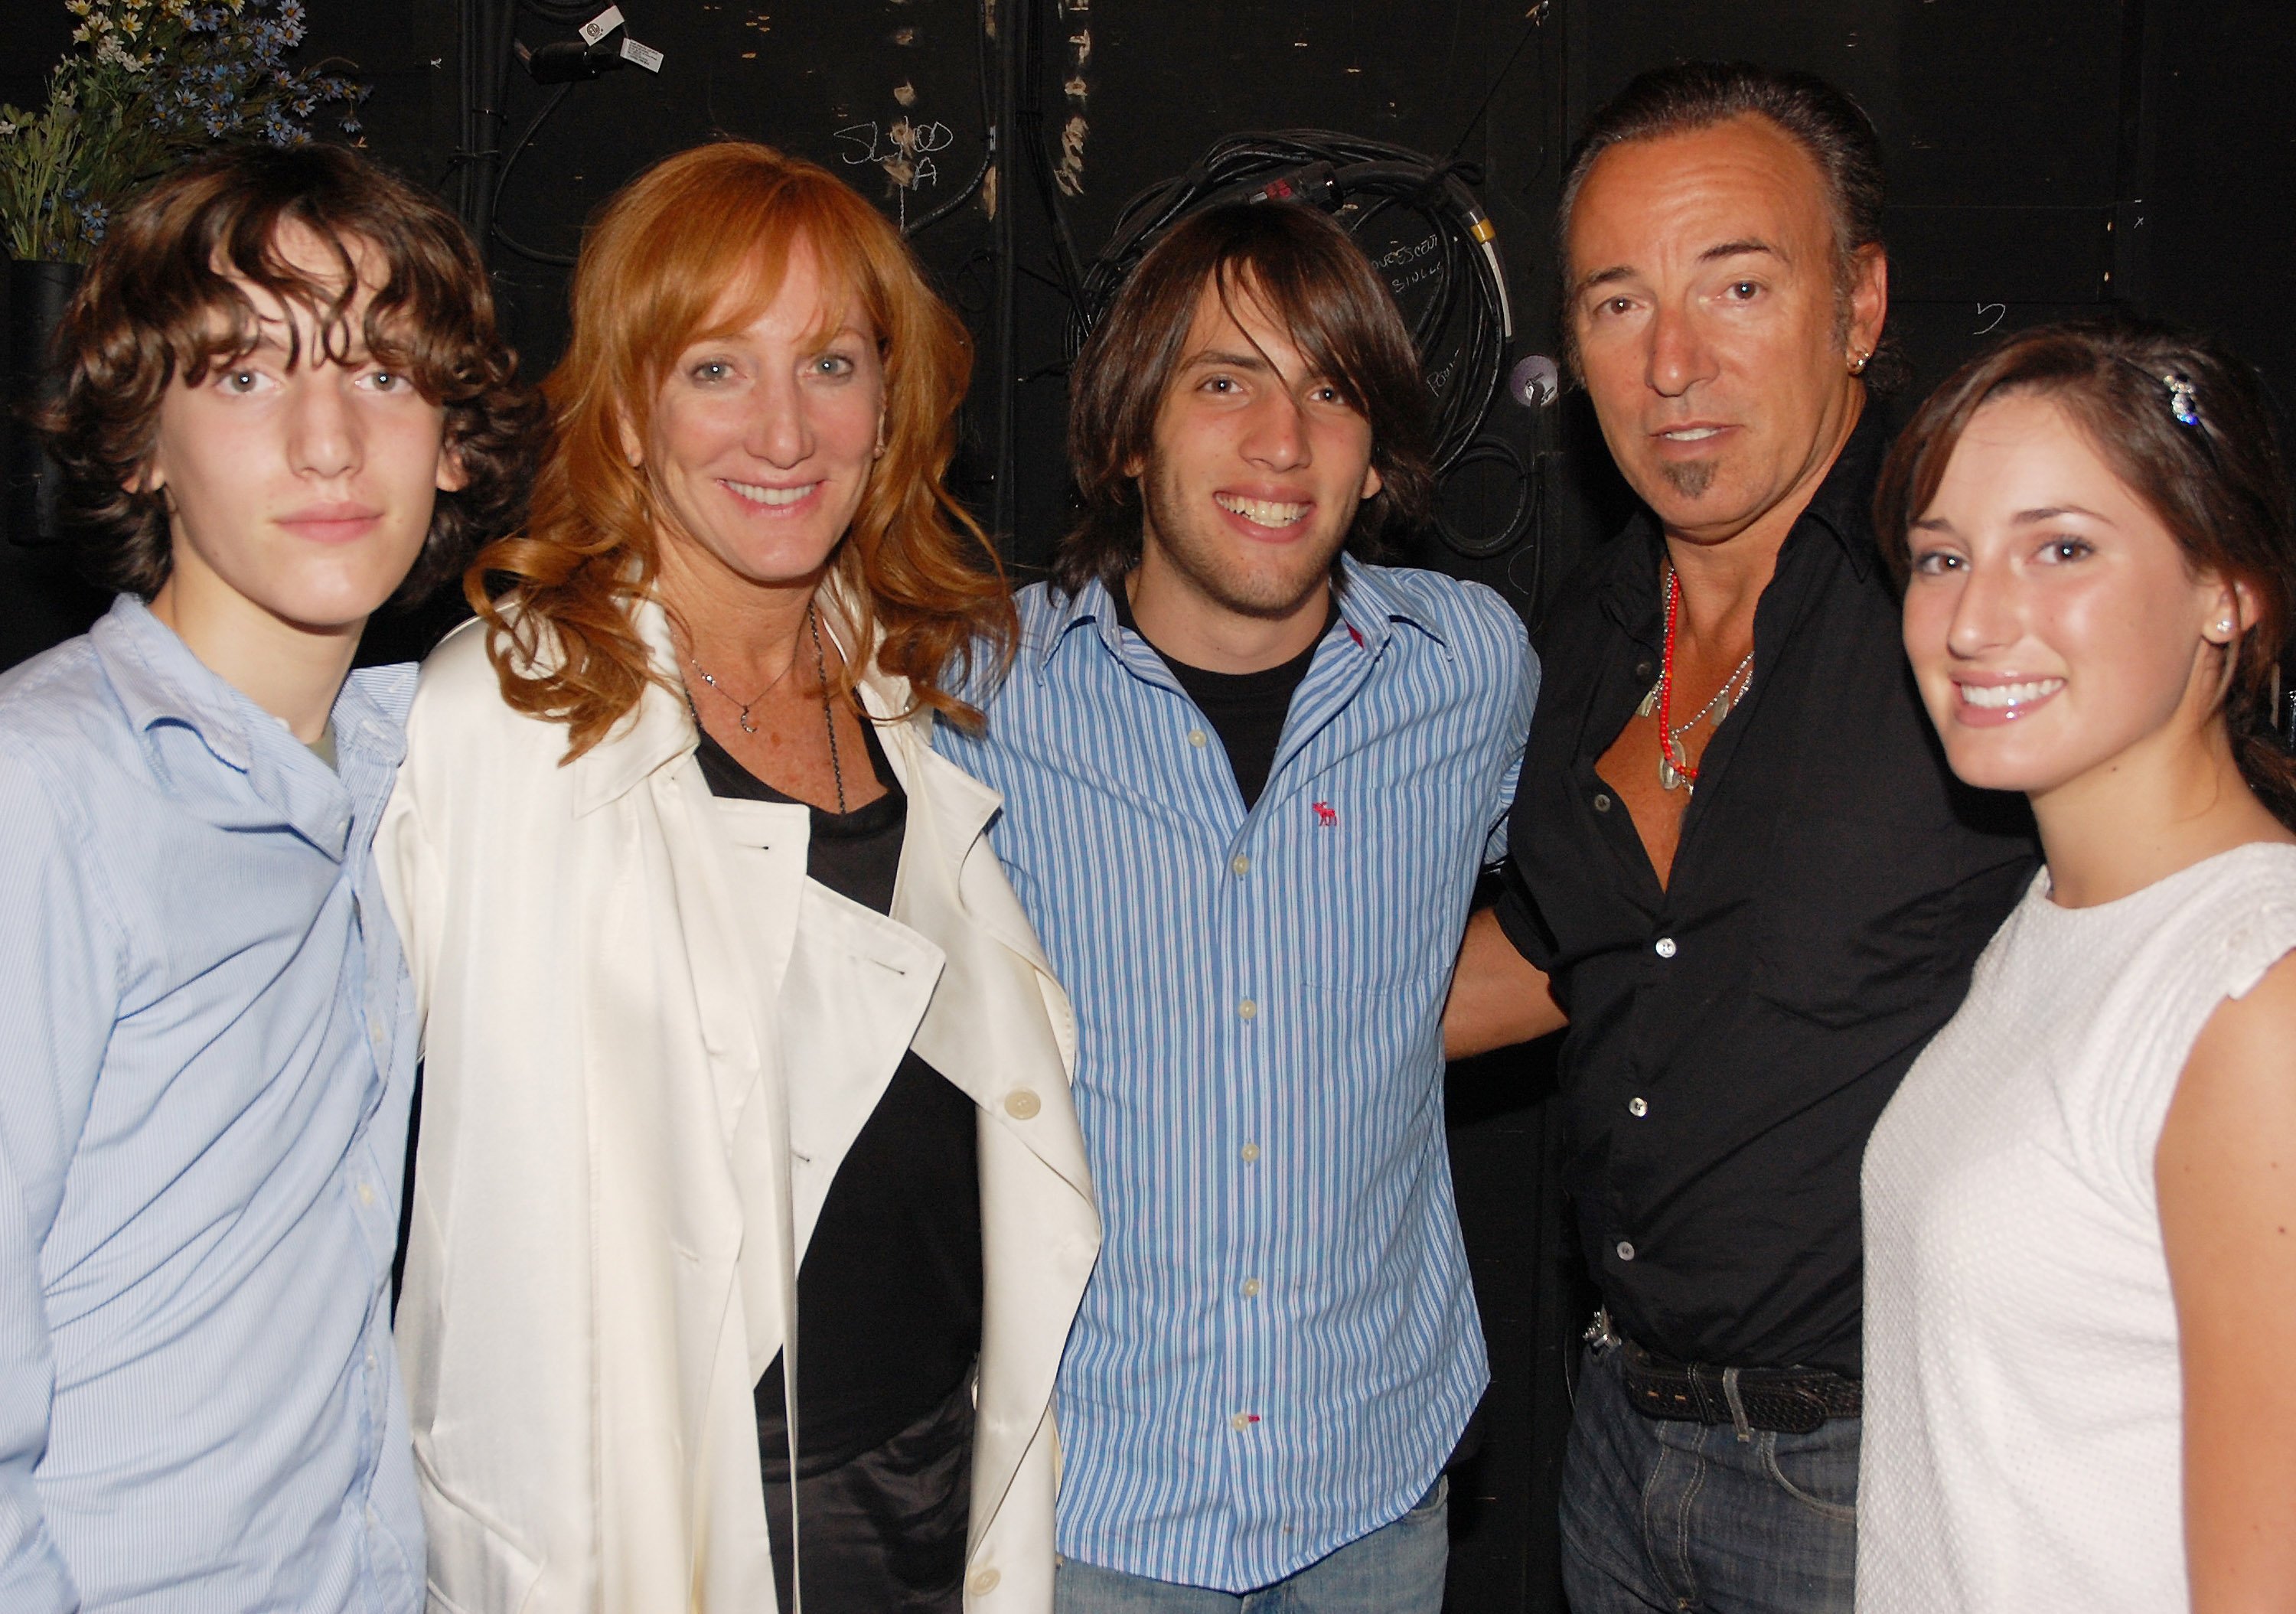 Sam Ryan Springsteen, Patti Scialfa, Evan James Springsteen, Bruce Springsteen and Jessica Rae Springsteen pose backstage at "Spring Awakening" on Broadway at The Eugene O'Neill Theater on August 8, 2008, in New York City | Source: Getty Images